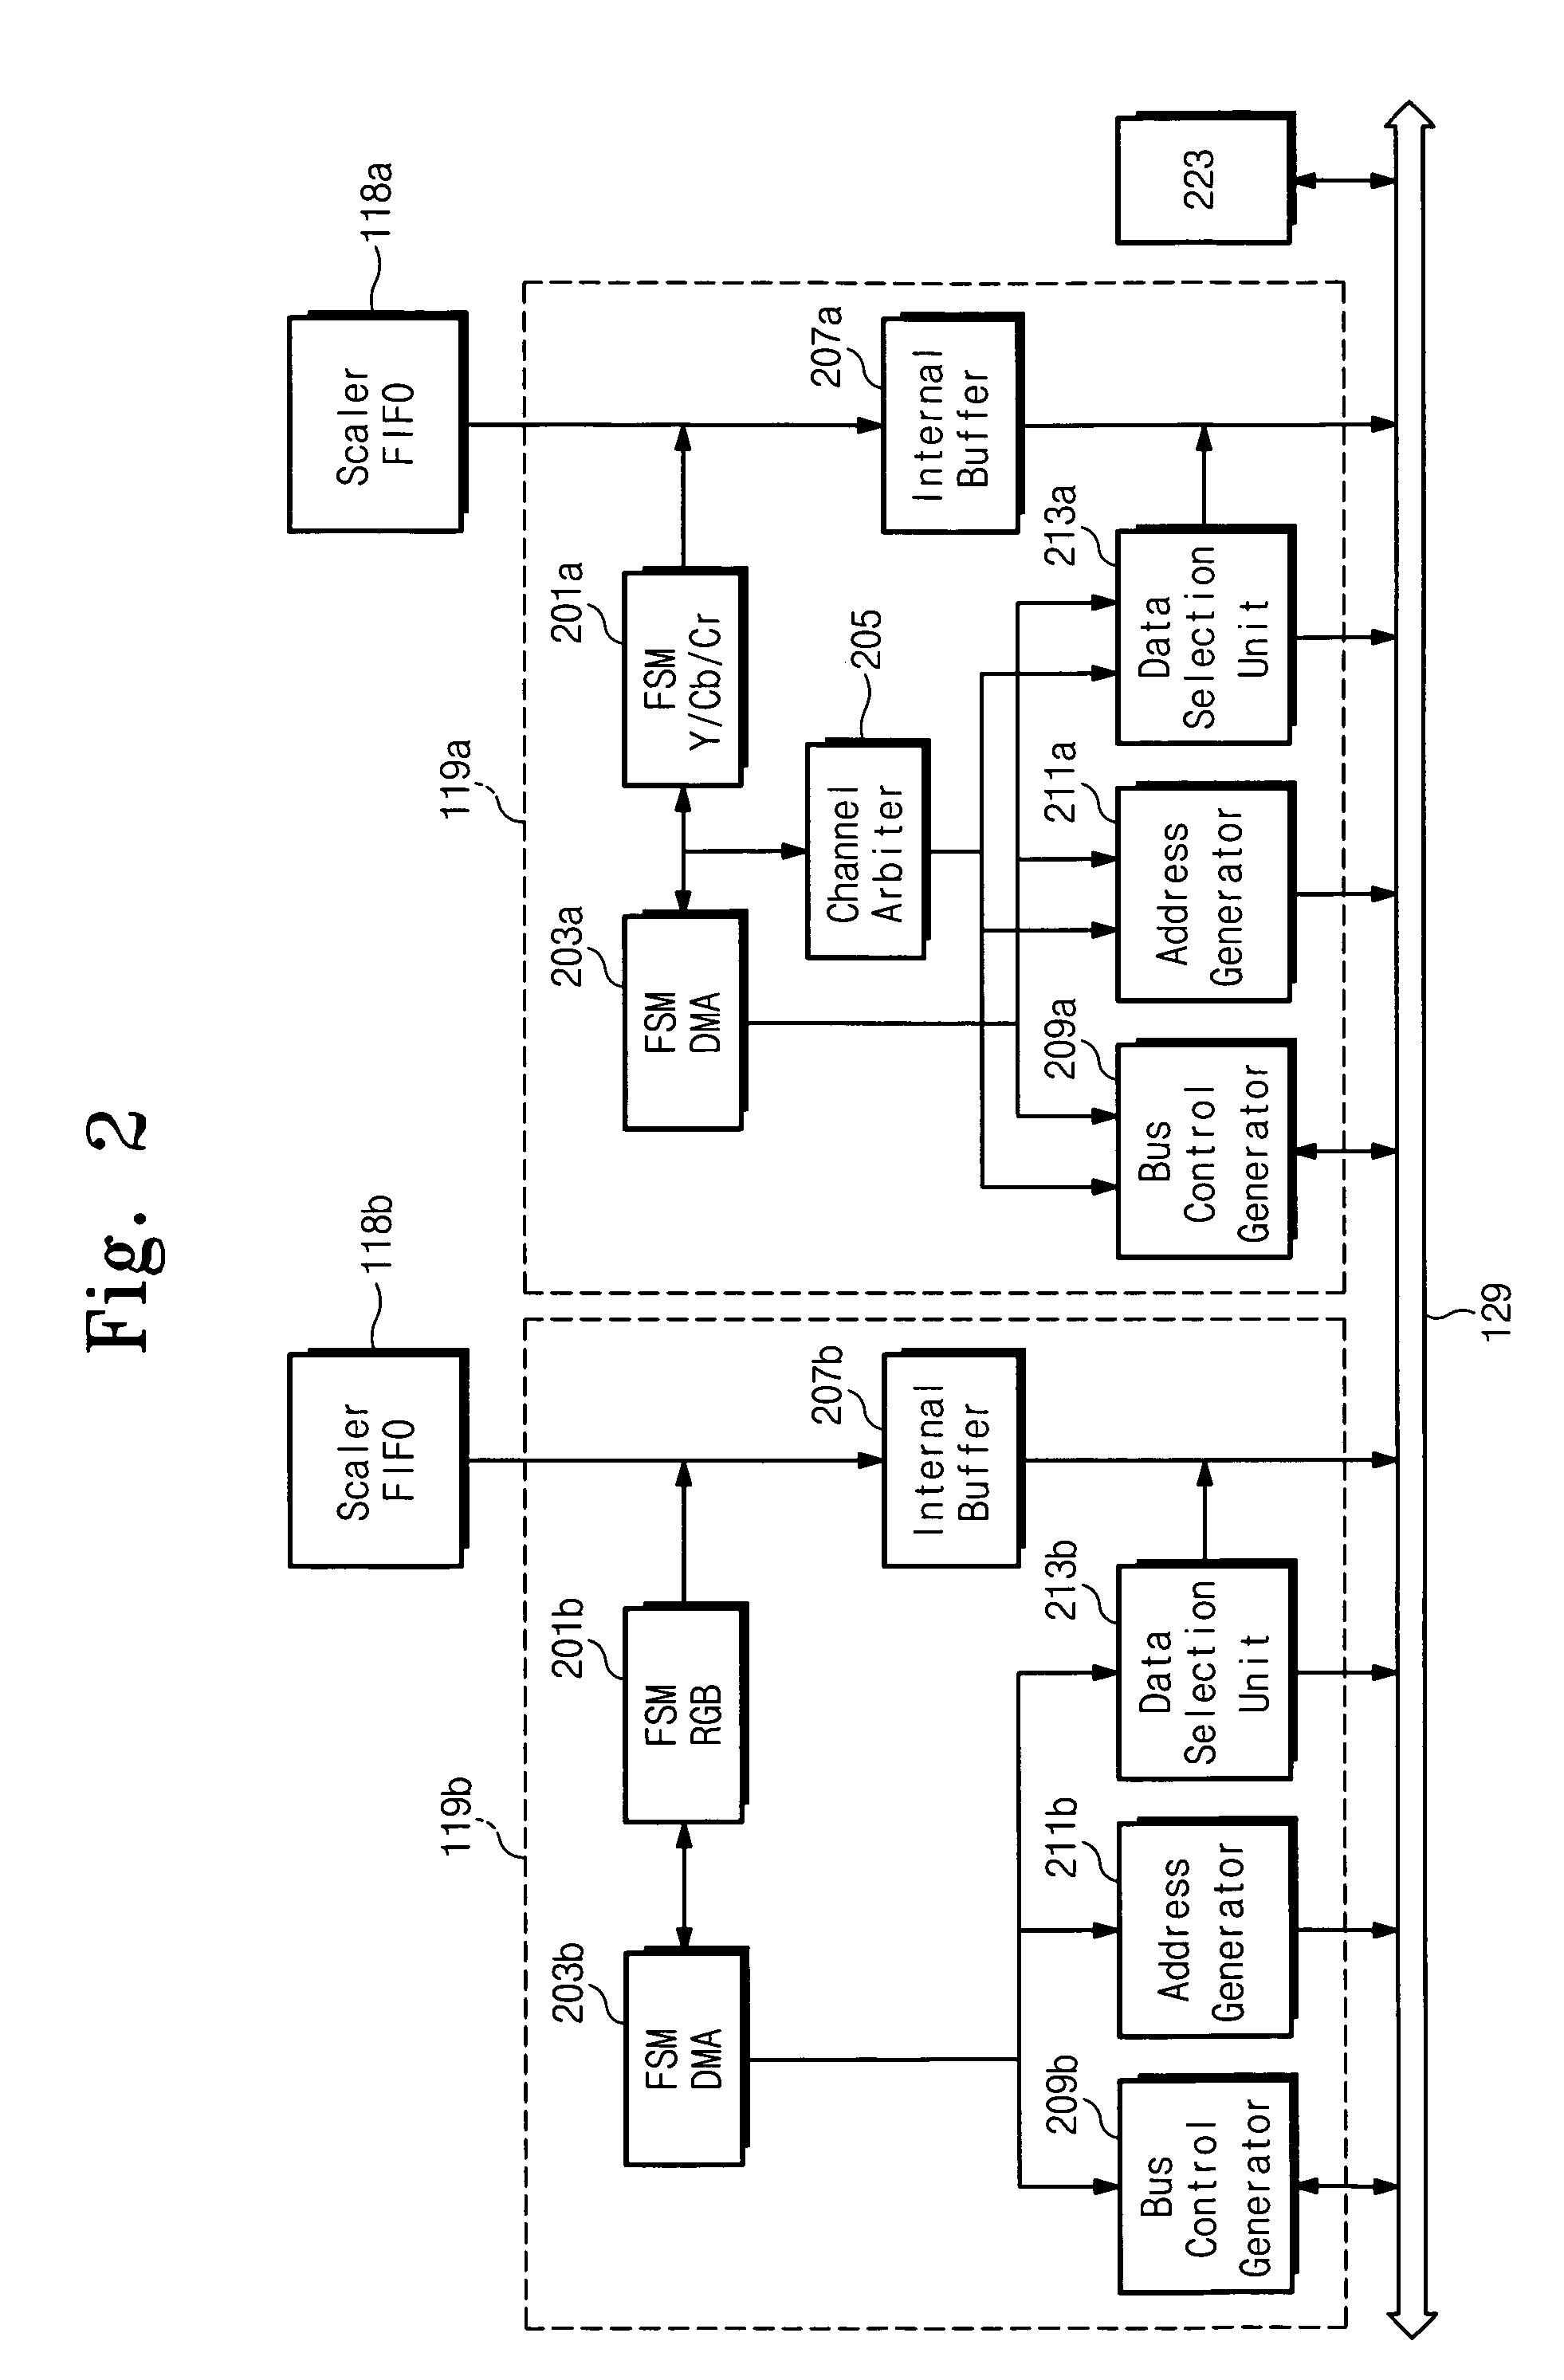 Camera interface and method using DMA unit to flip or rotate a digital image